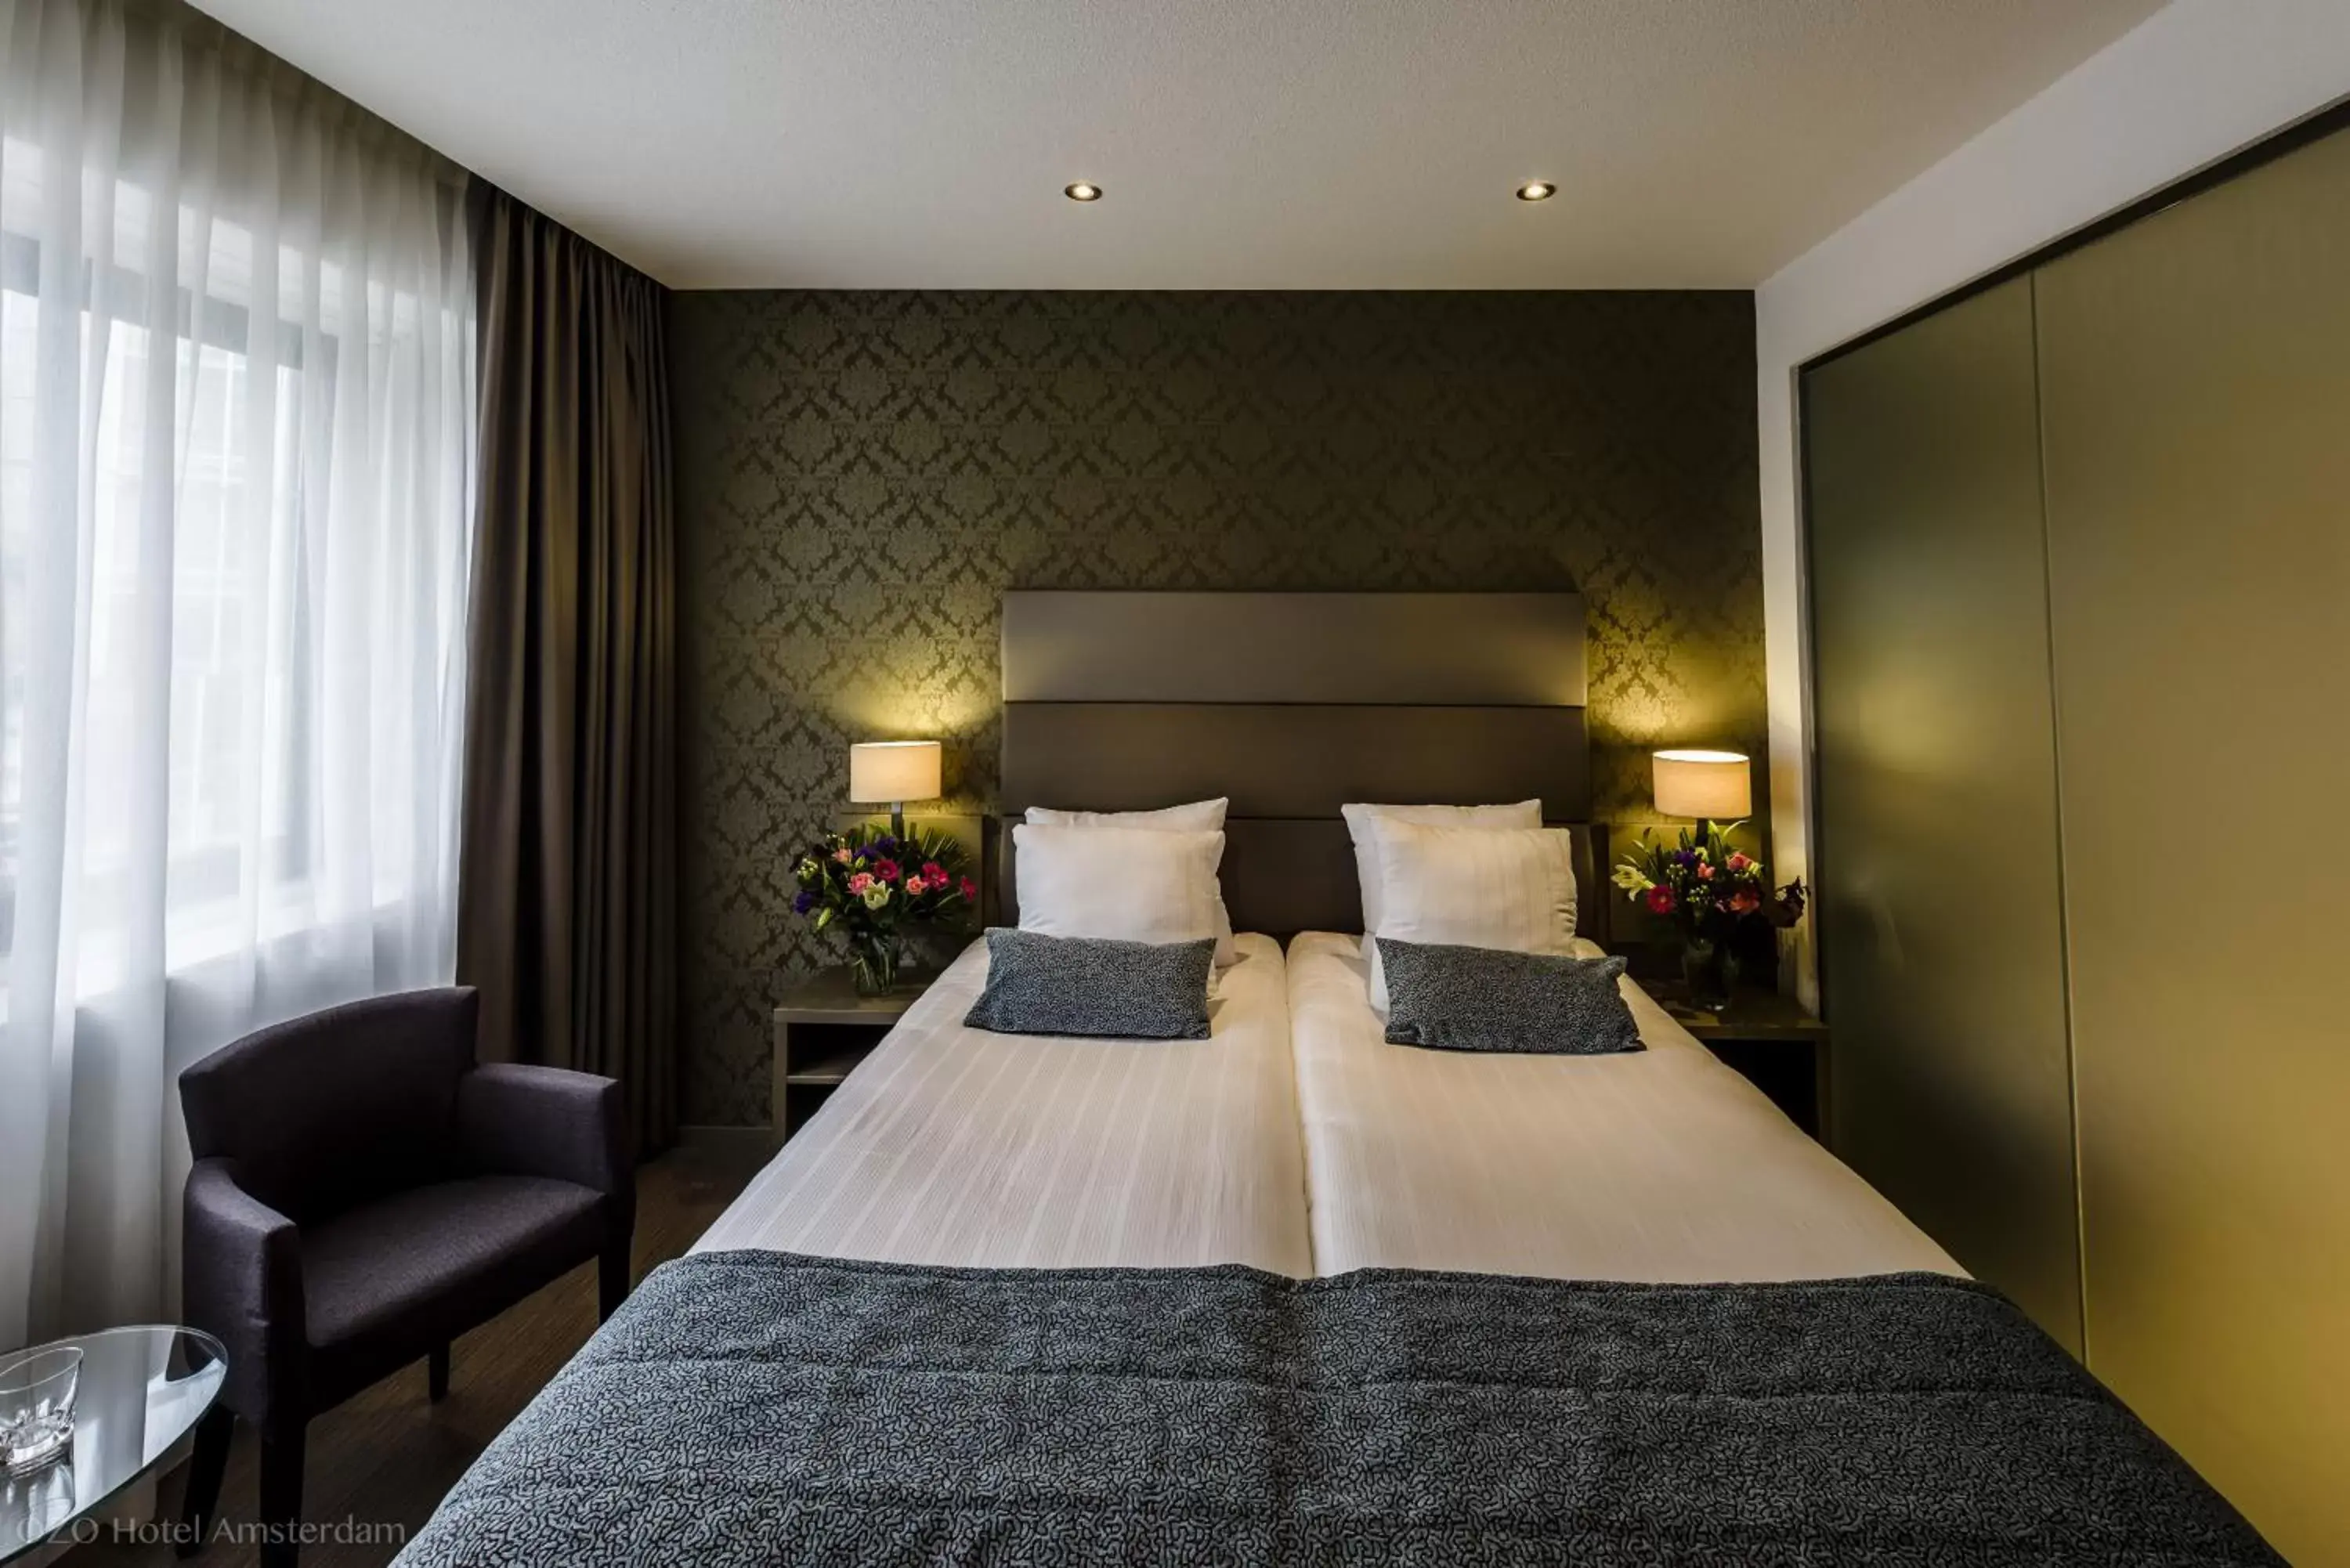 Bed in OZO Hotels Arena Amsterdam